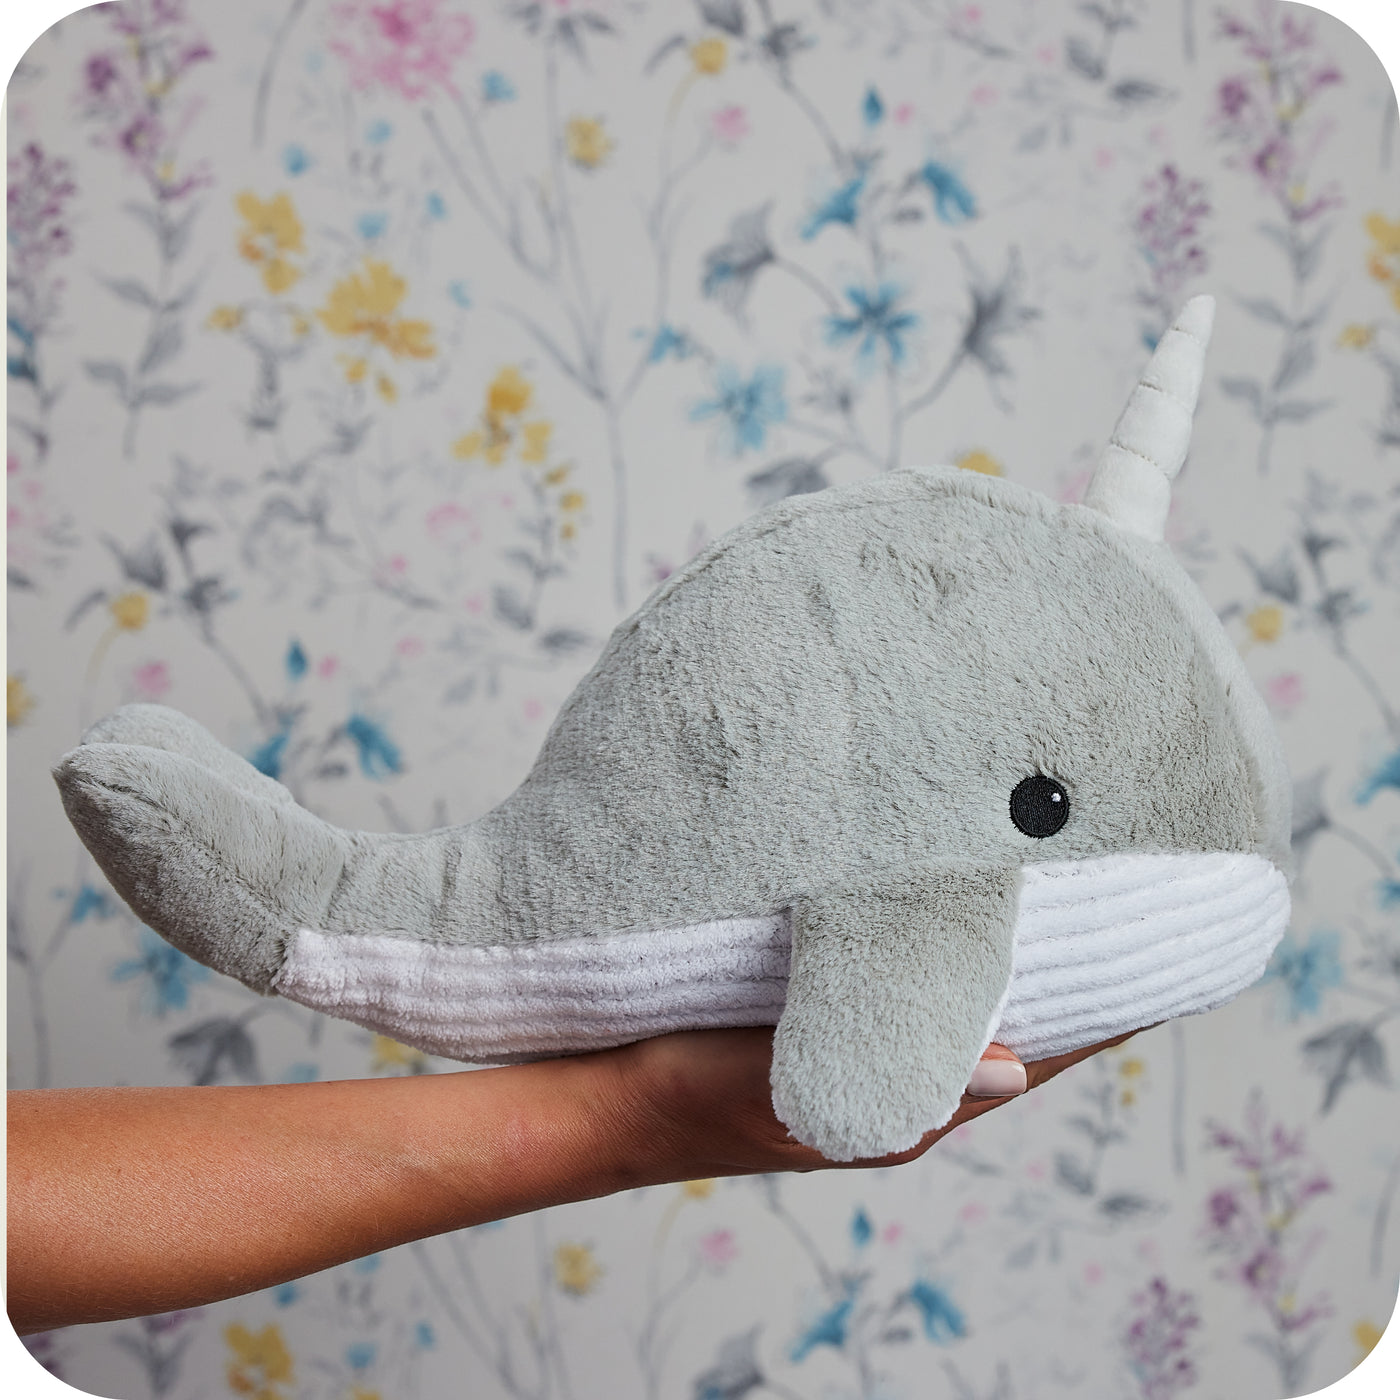 Warmies Narwhal